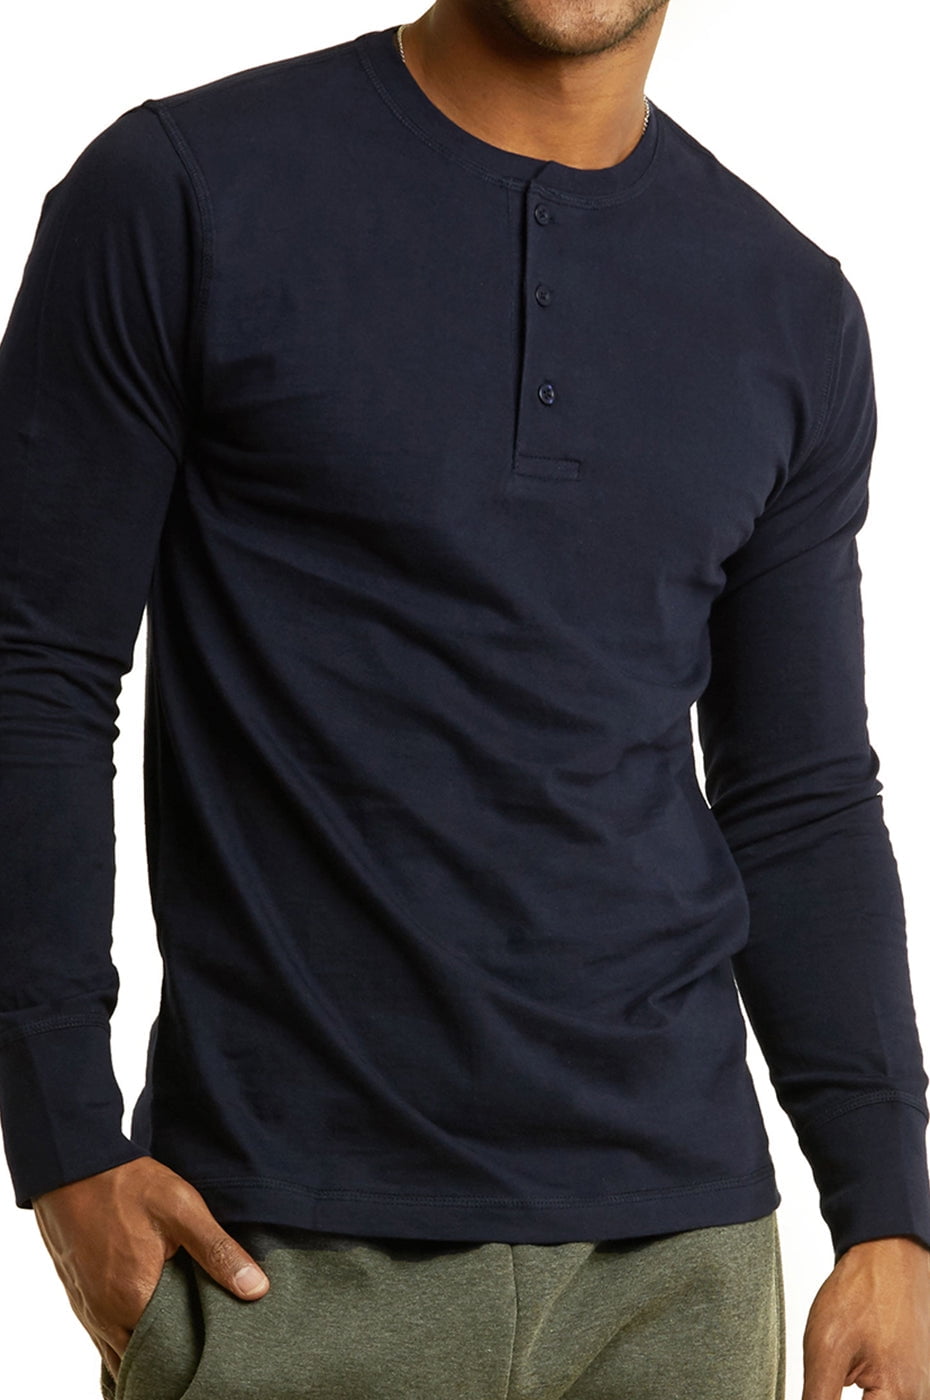 Knocker Men's Long Sleeve 3-Button Classic Athletic Henley Tee Shirts ...